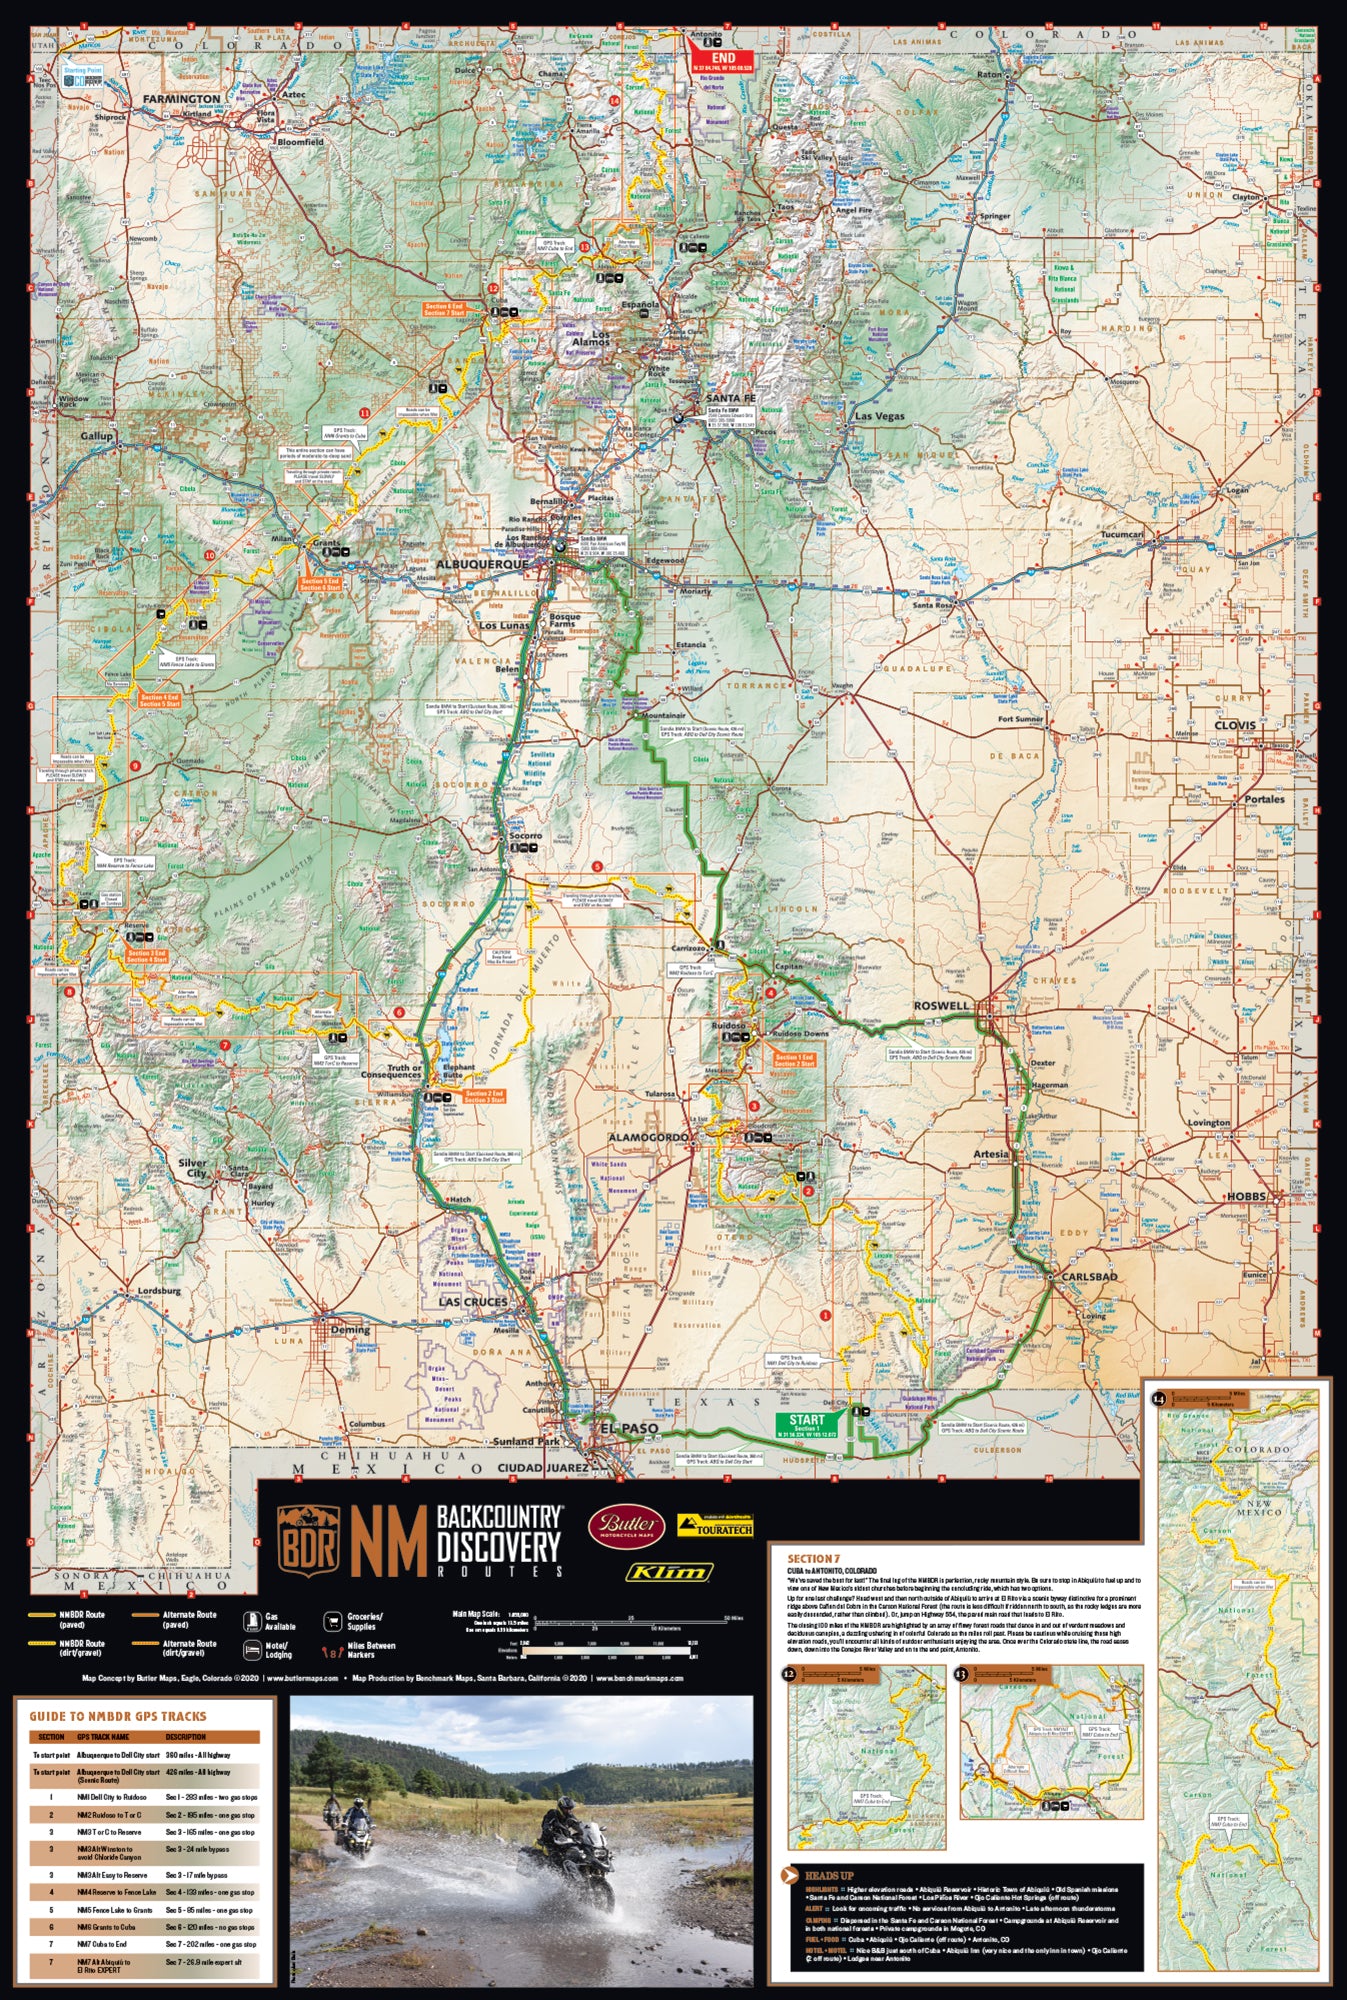 New Mexico Backcountry Discovery Route (NMBDR) Map 2nd Edition